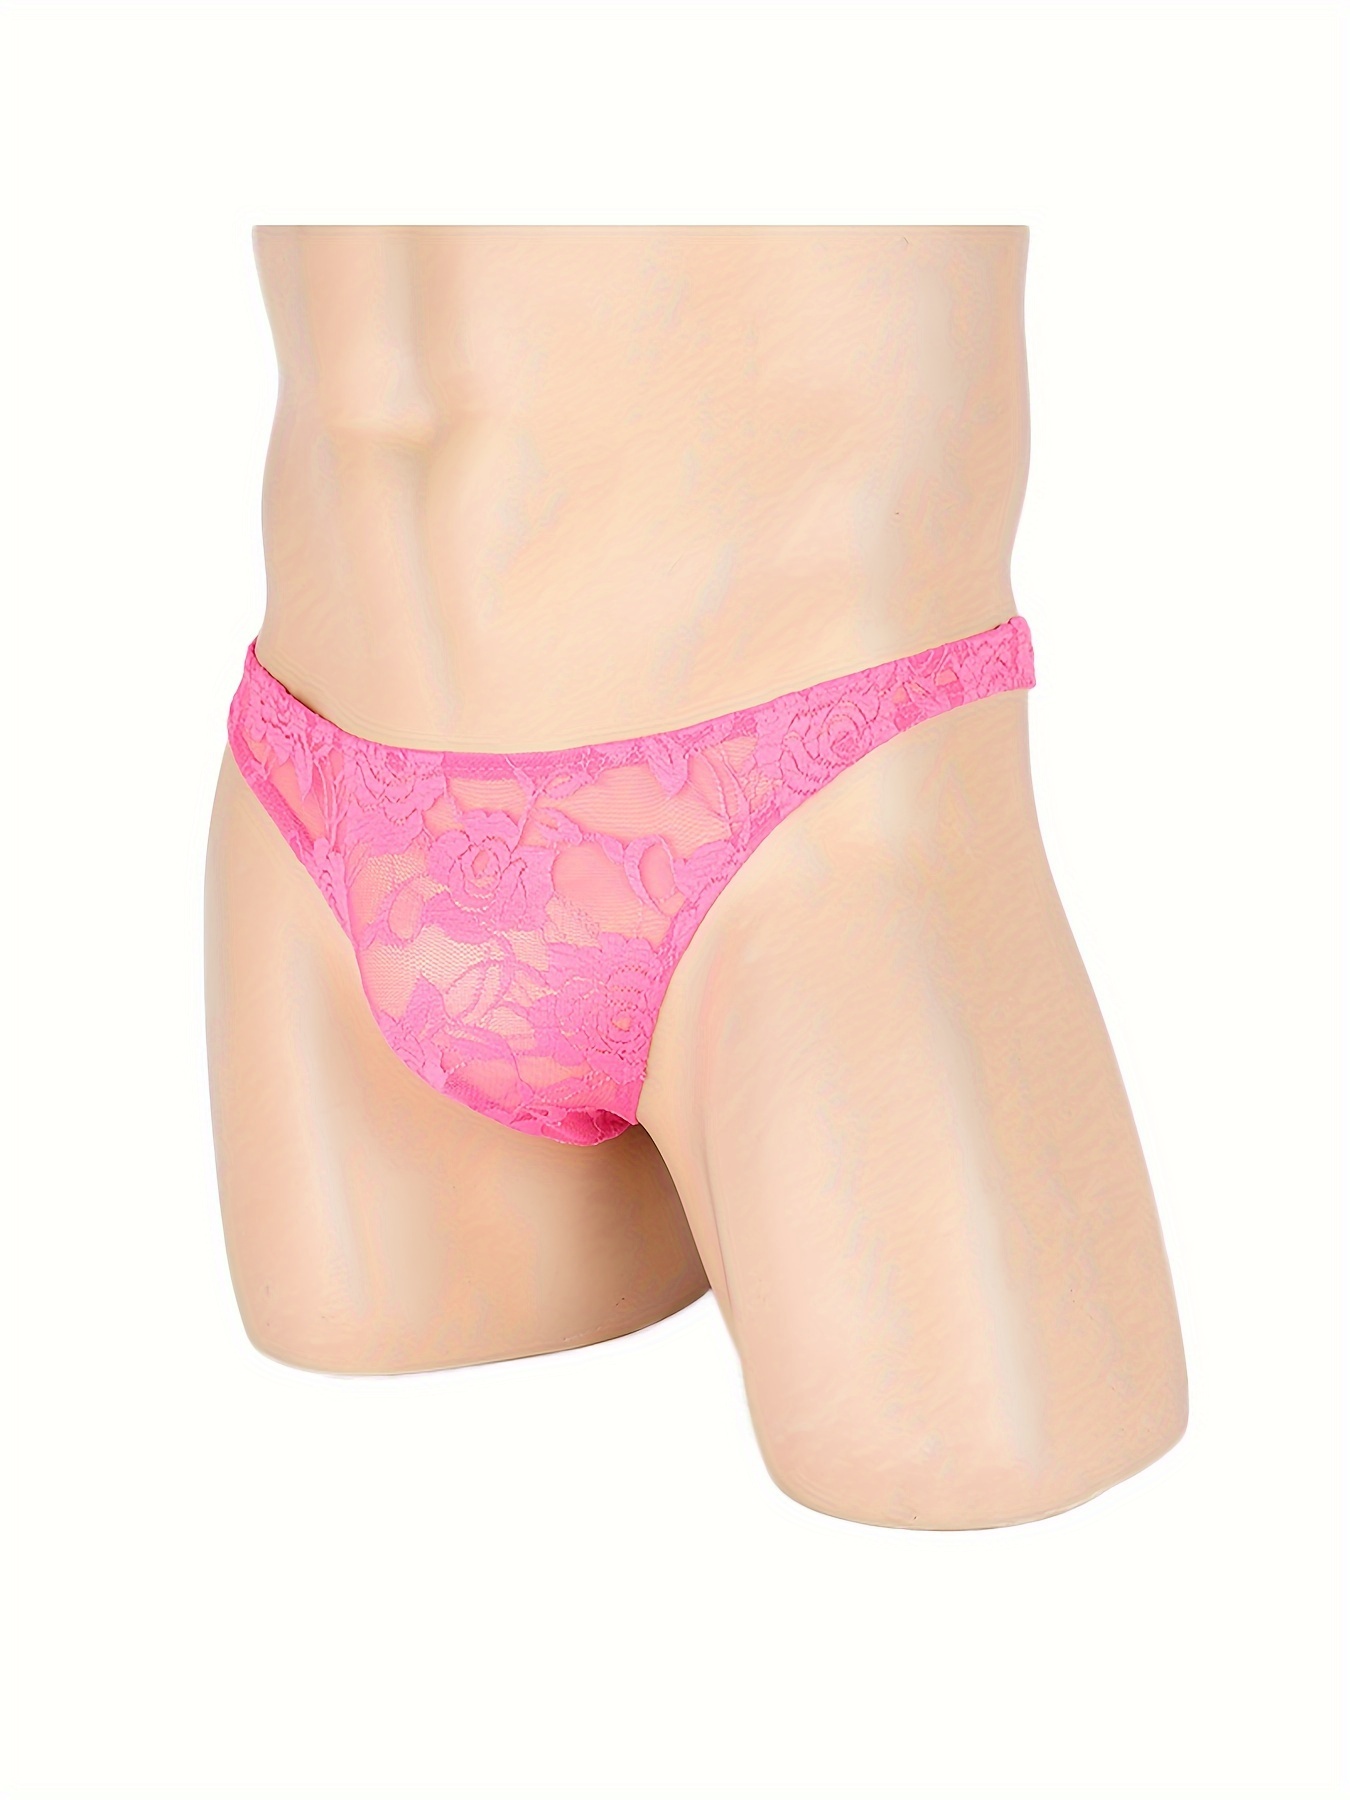 Low Waisted Transparent Panties - Power Day Sale